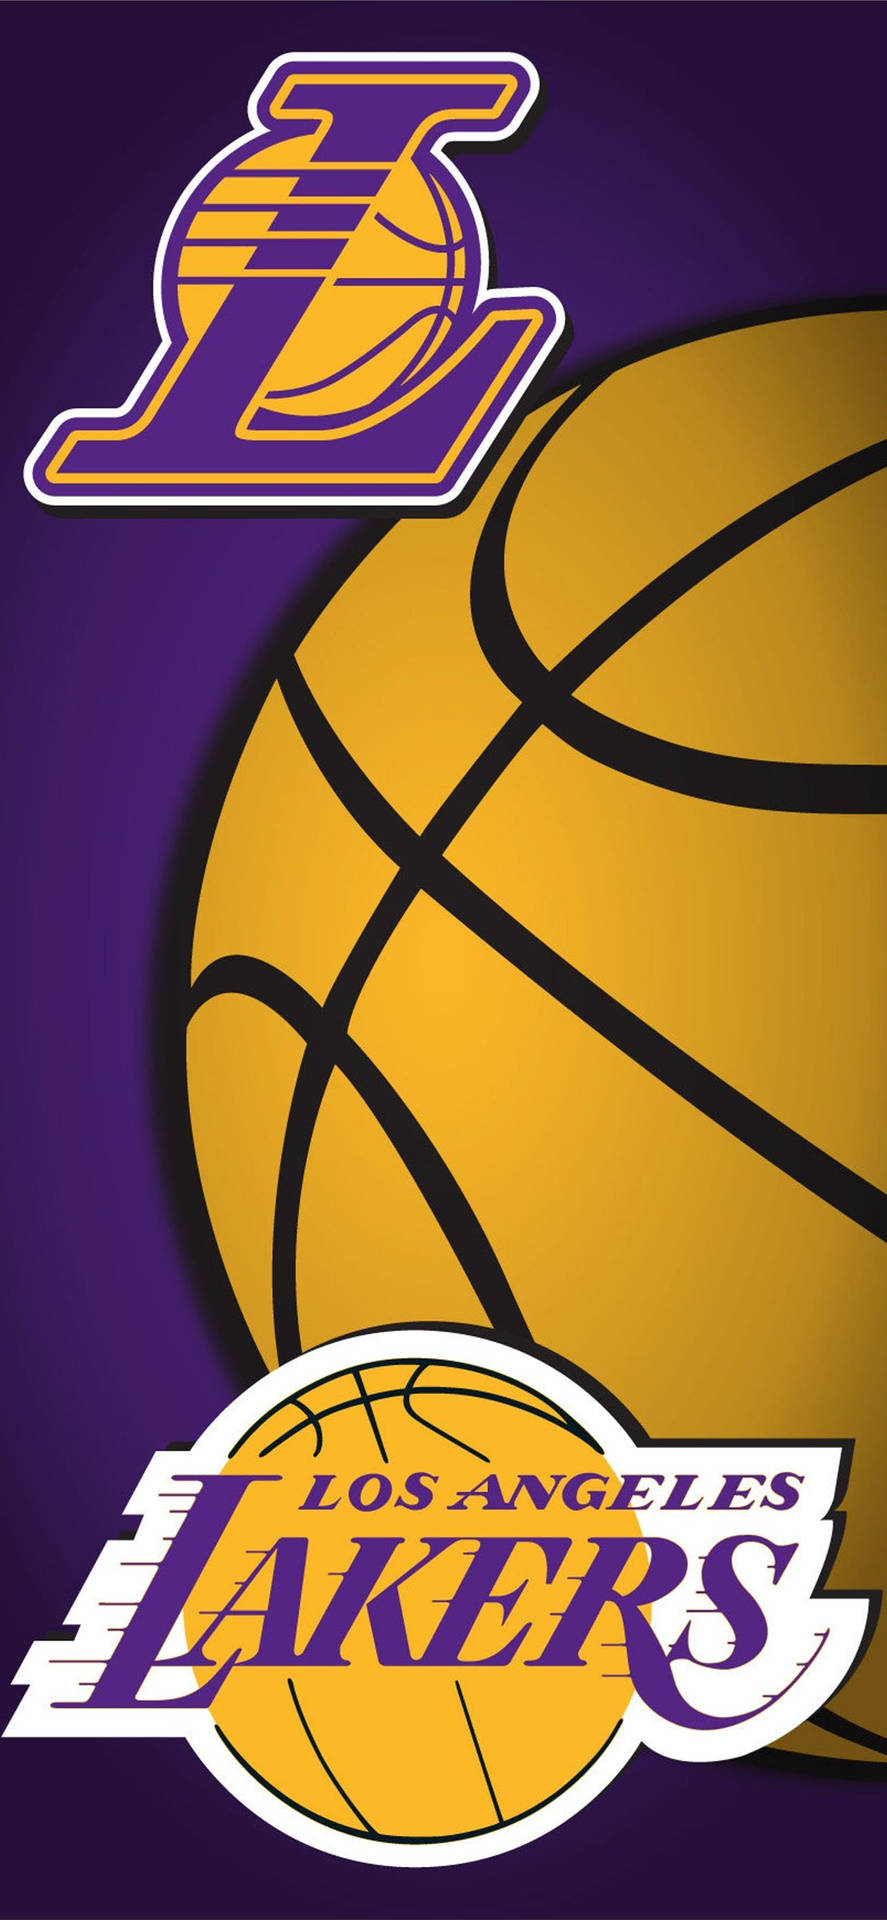 Download Show off your Lakers pride with this fabulous Lakers